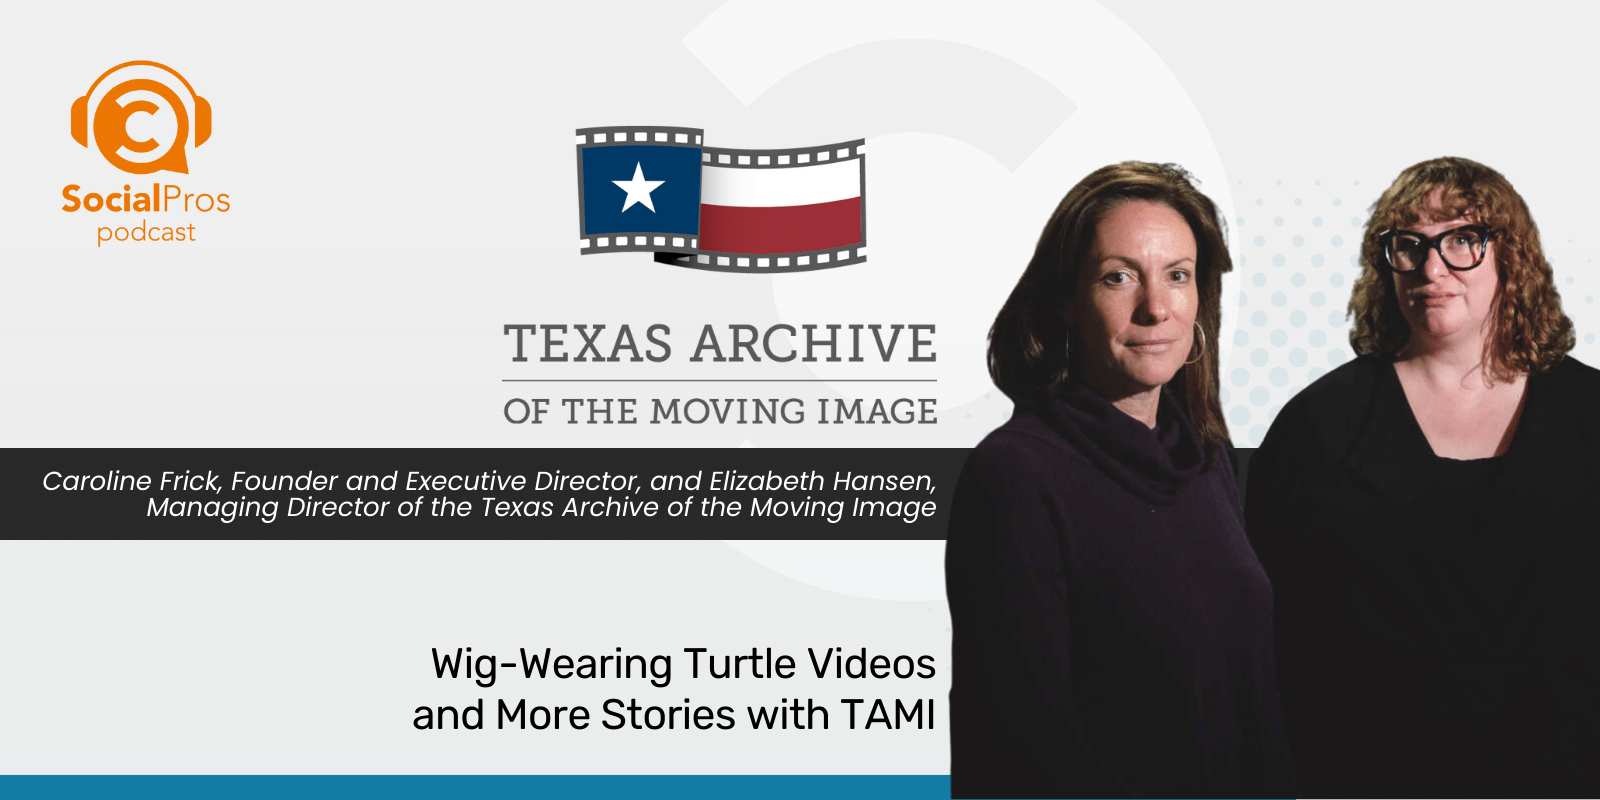 Wig-Wearing Turtle Videos and More Stories with TAMI